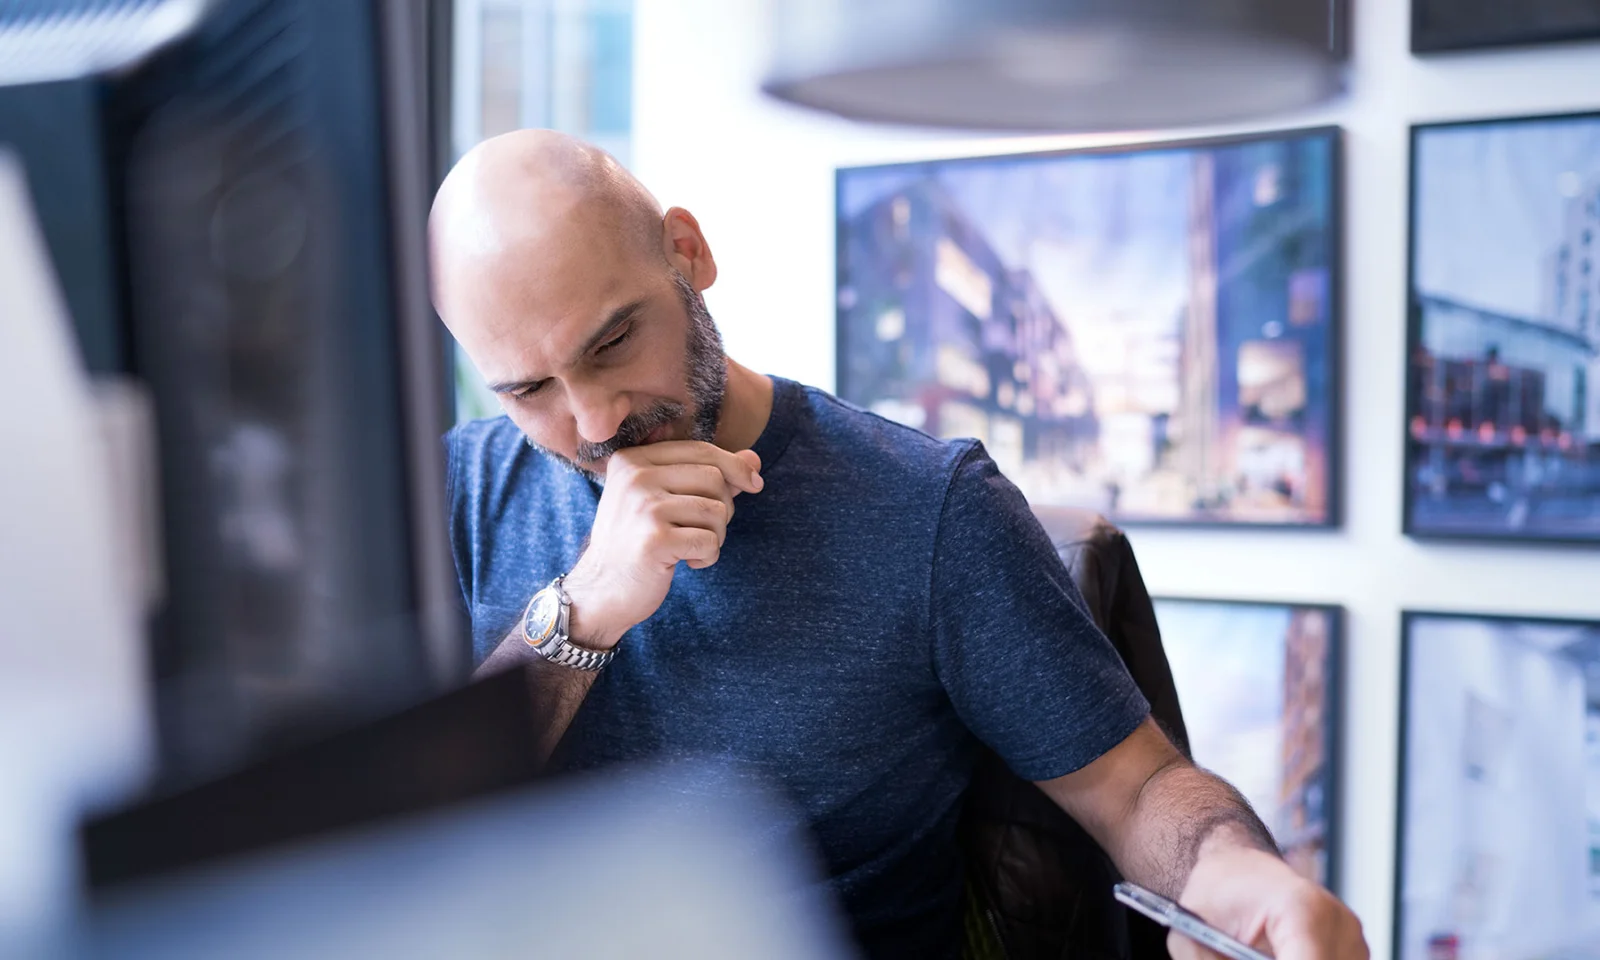 A focused professional man with a bald head and beard, wearing a blue shirt, thinking deeply while holding a pen and looking at documents on his desk.